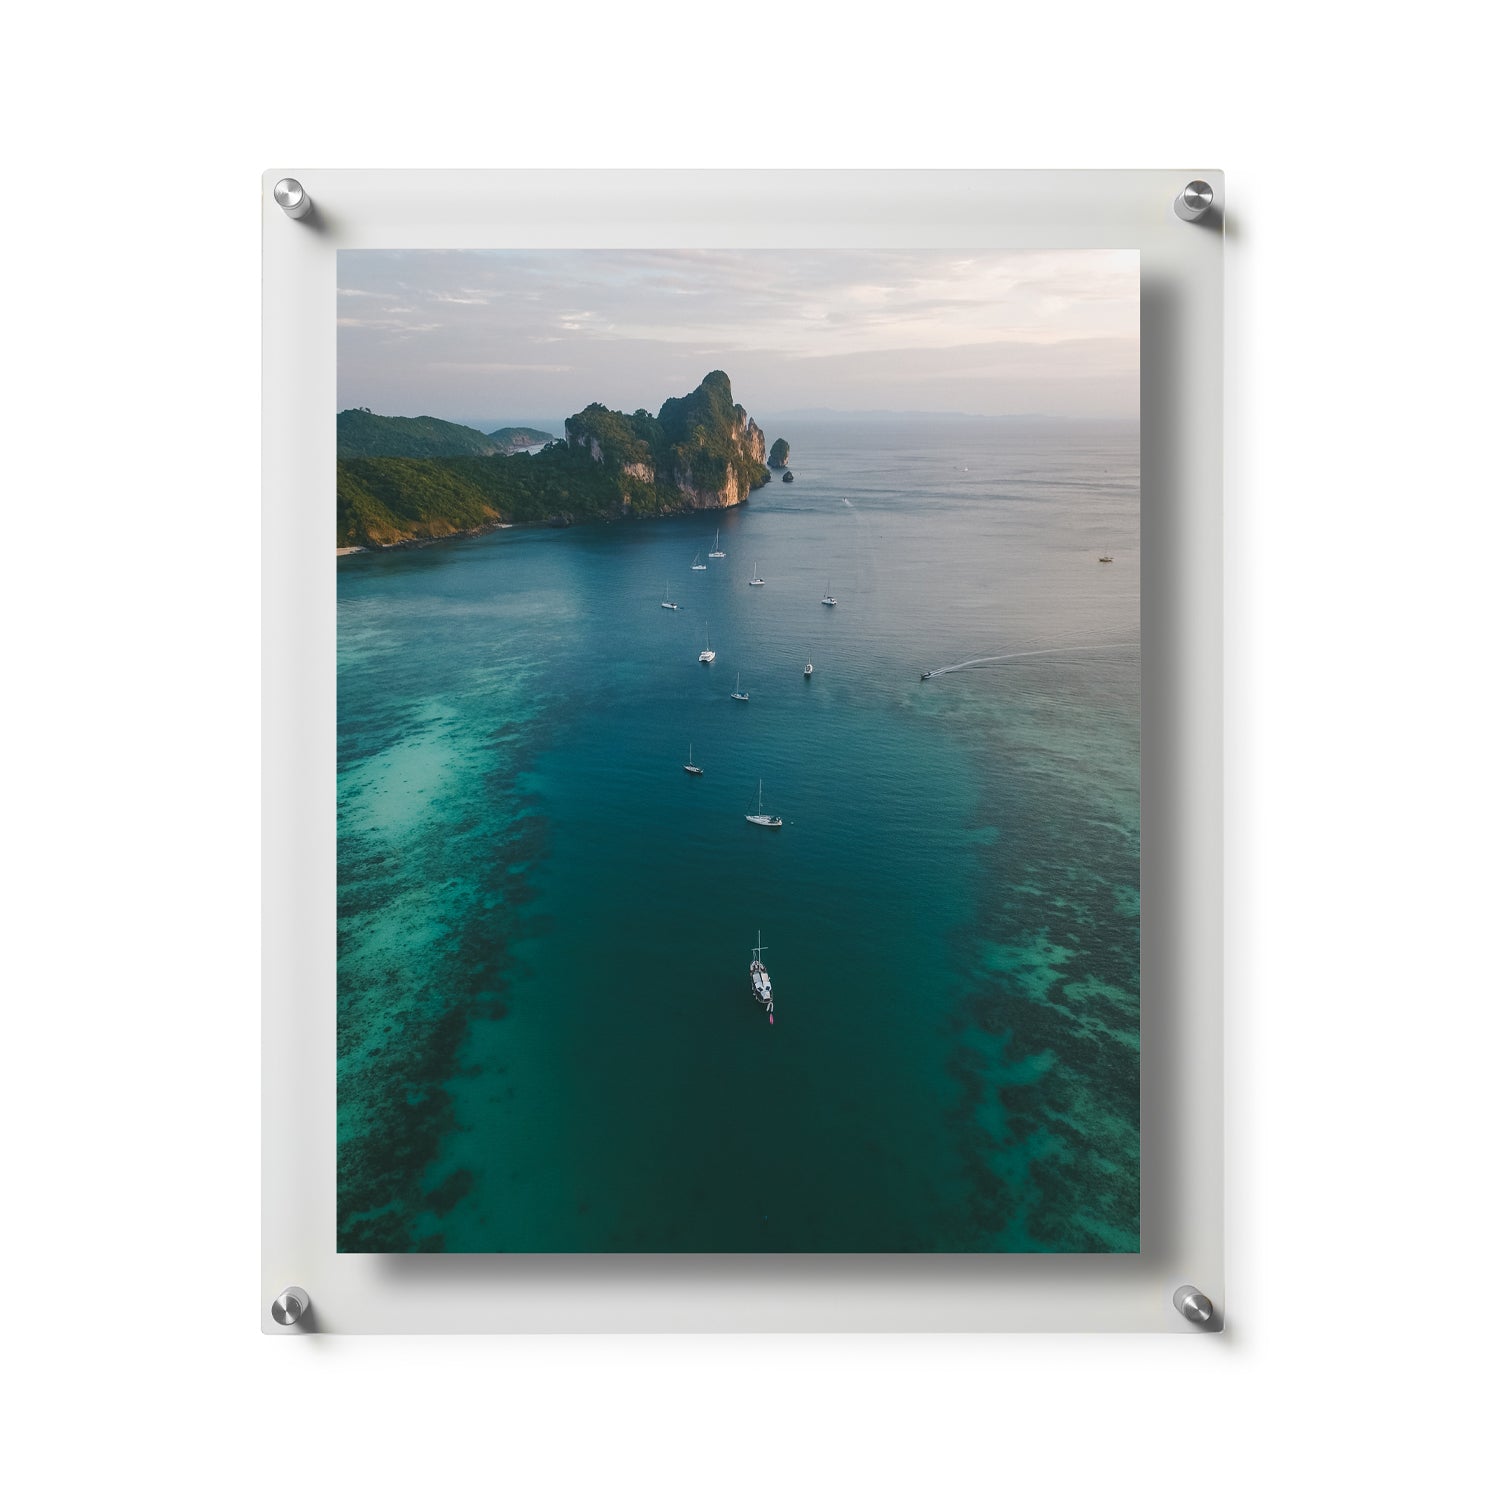 16x20" Photo Floating Acrylic Clear Picture Frame (Frame Size 19x23")